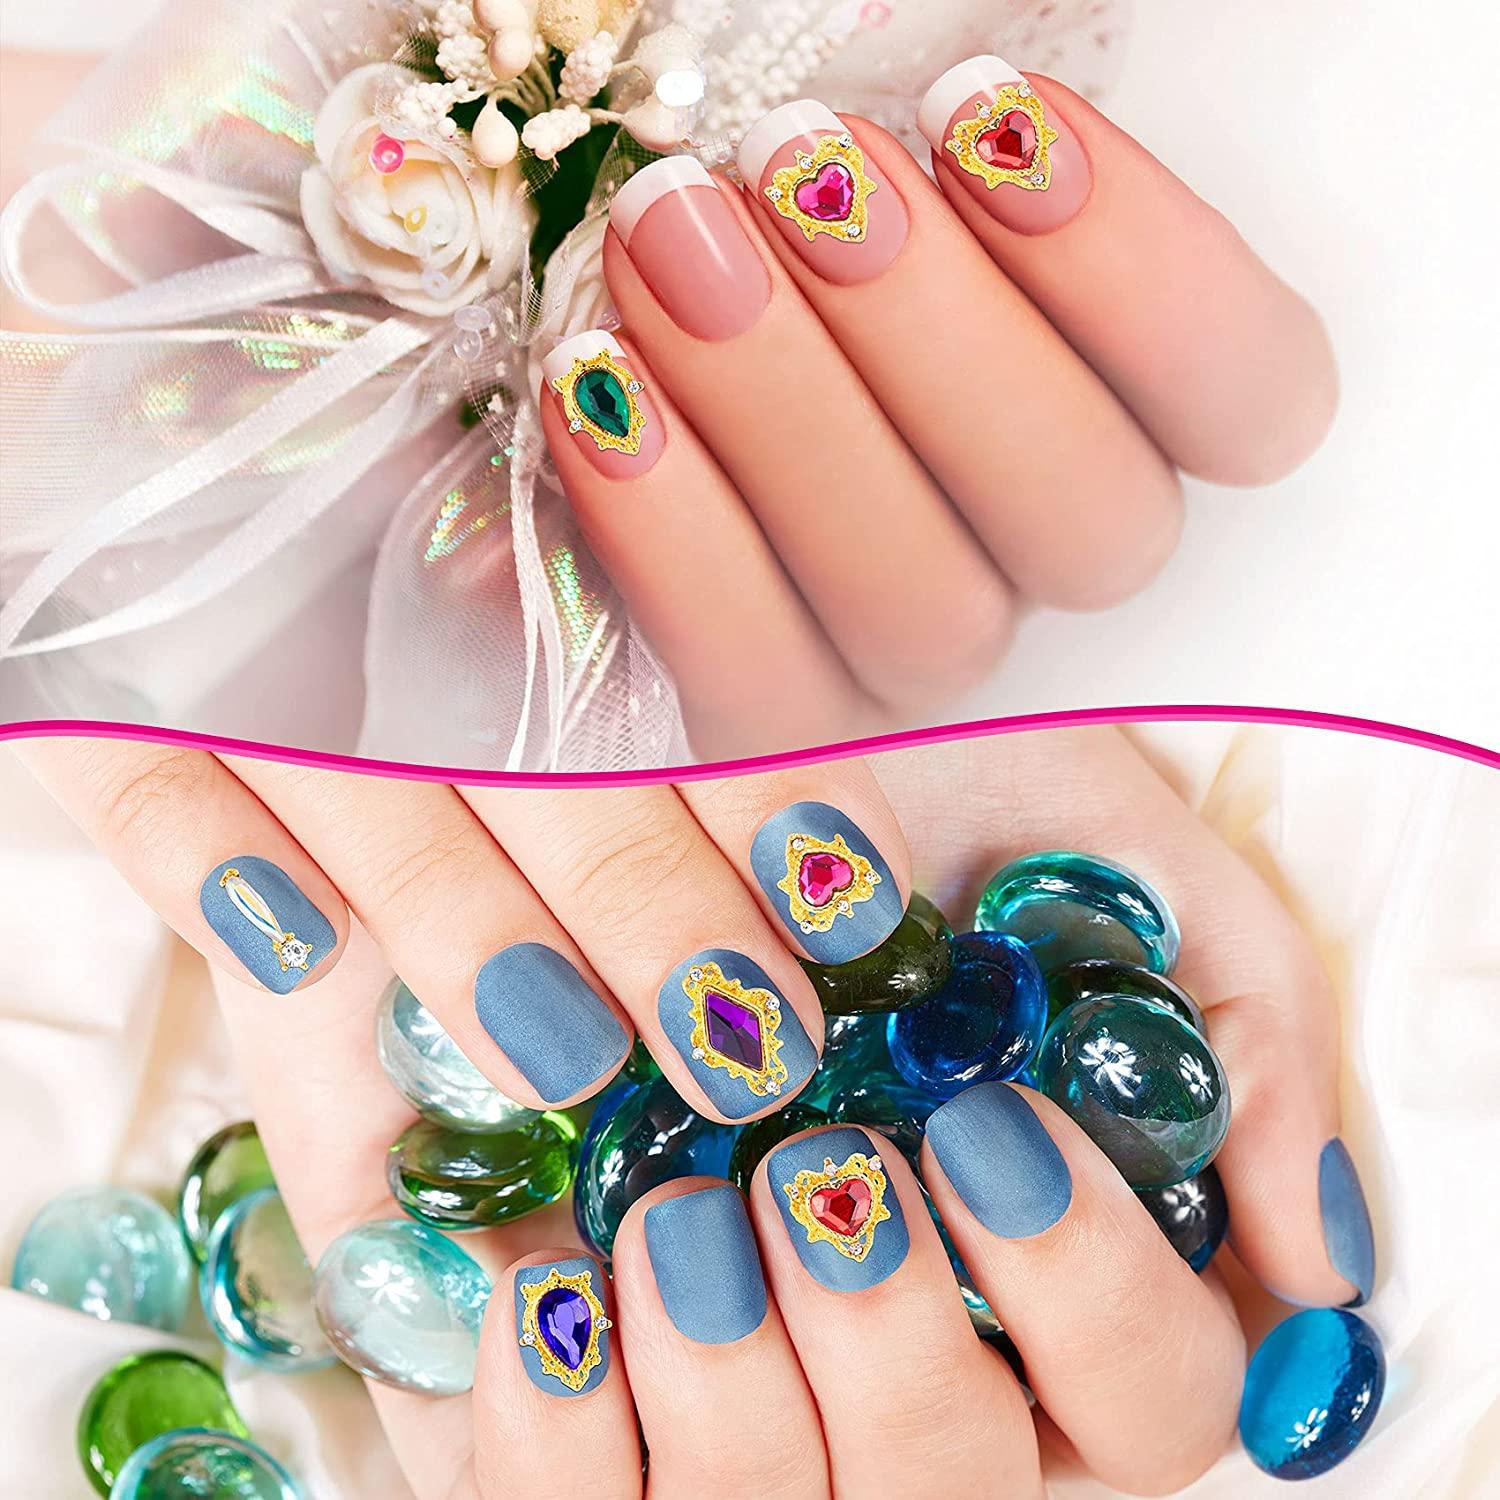 Jewelry Crystal Shapes Nails, Stone Gold Charms Nail Art